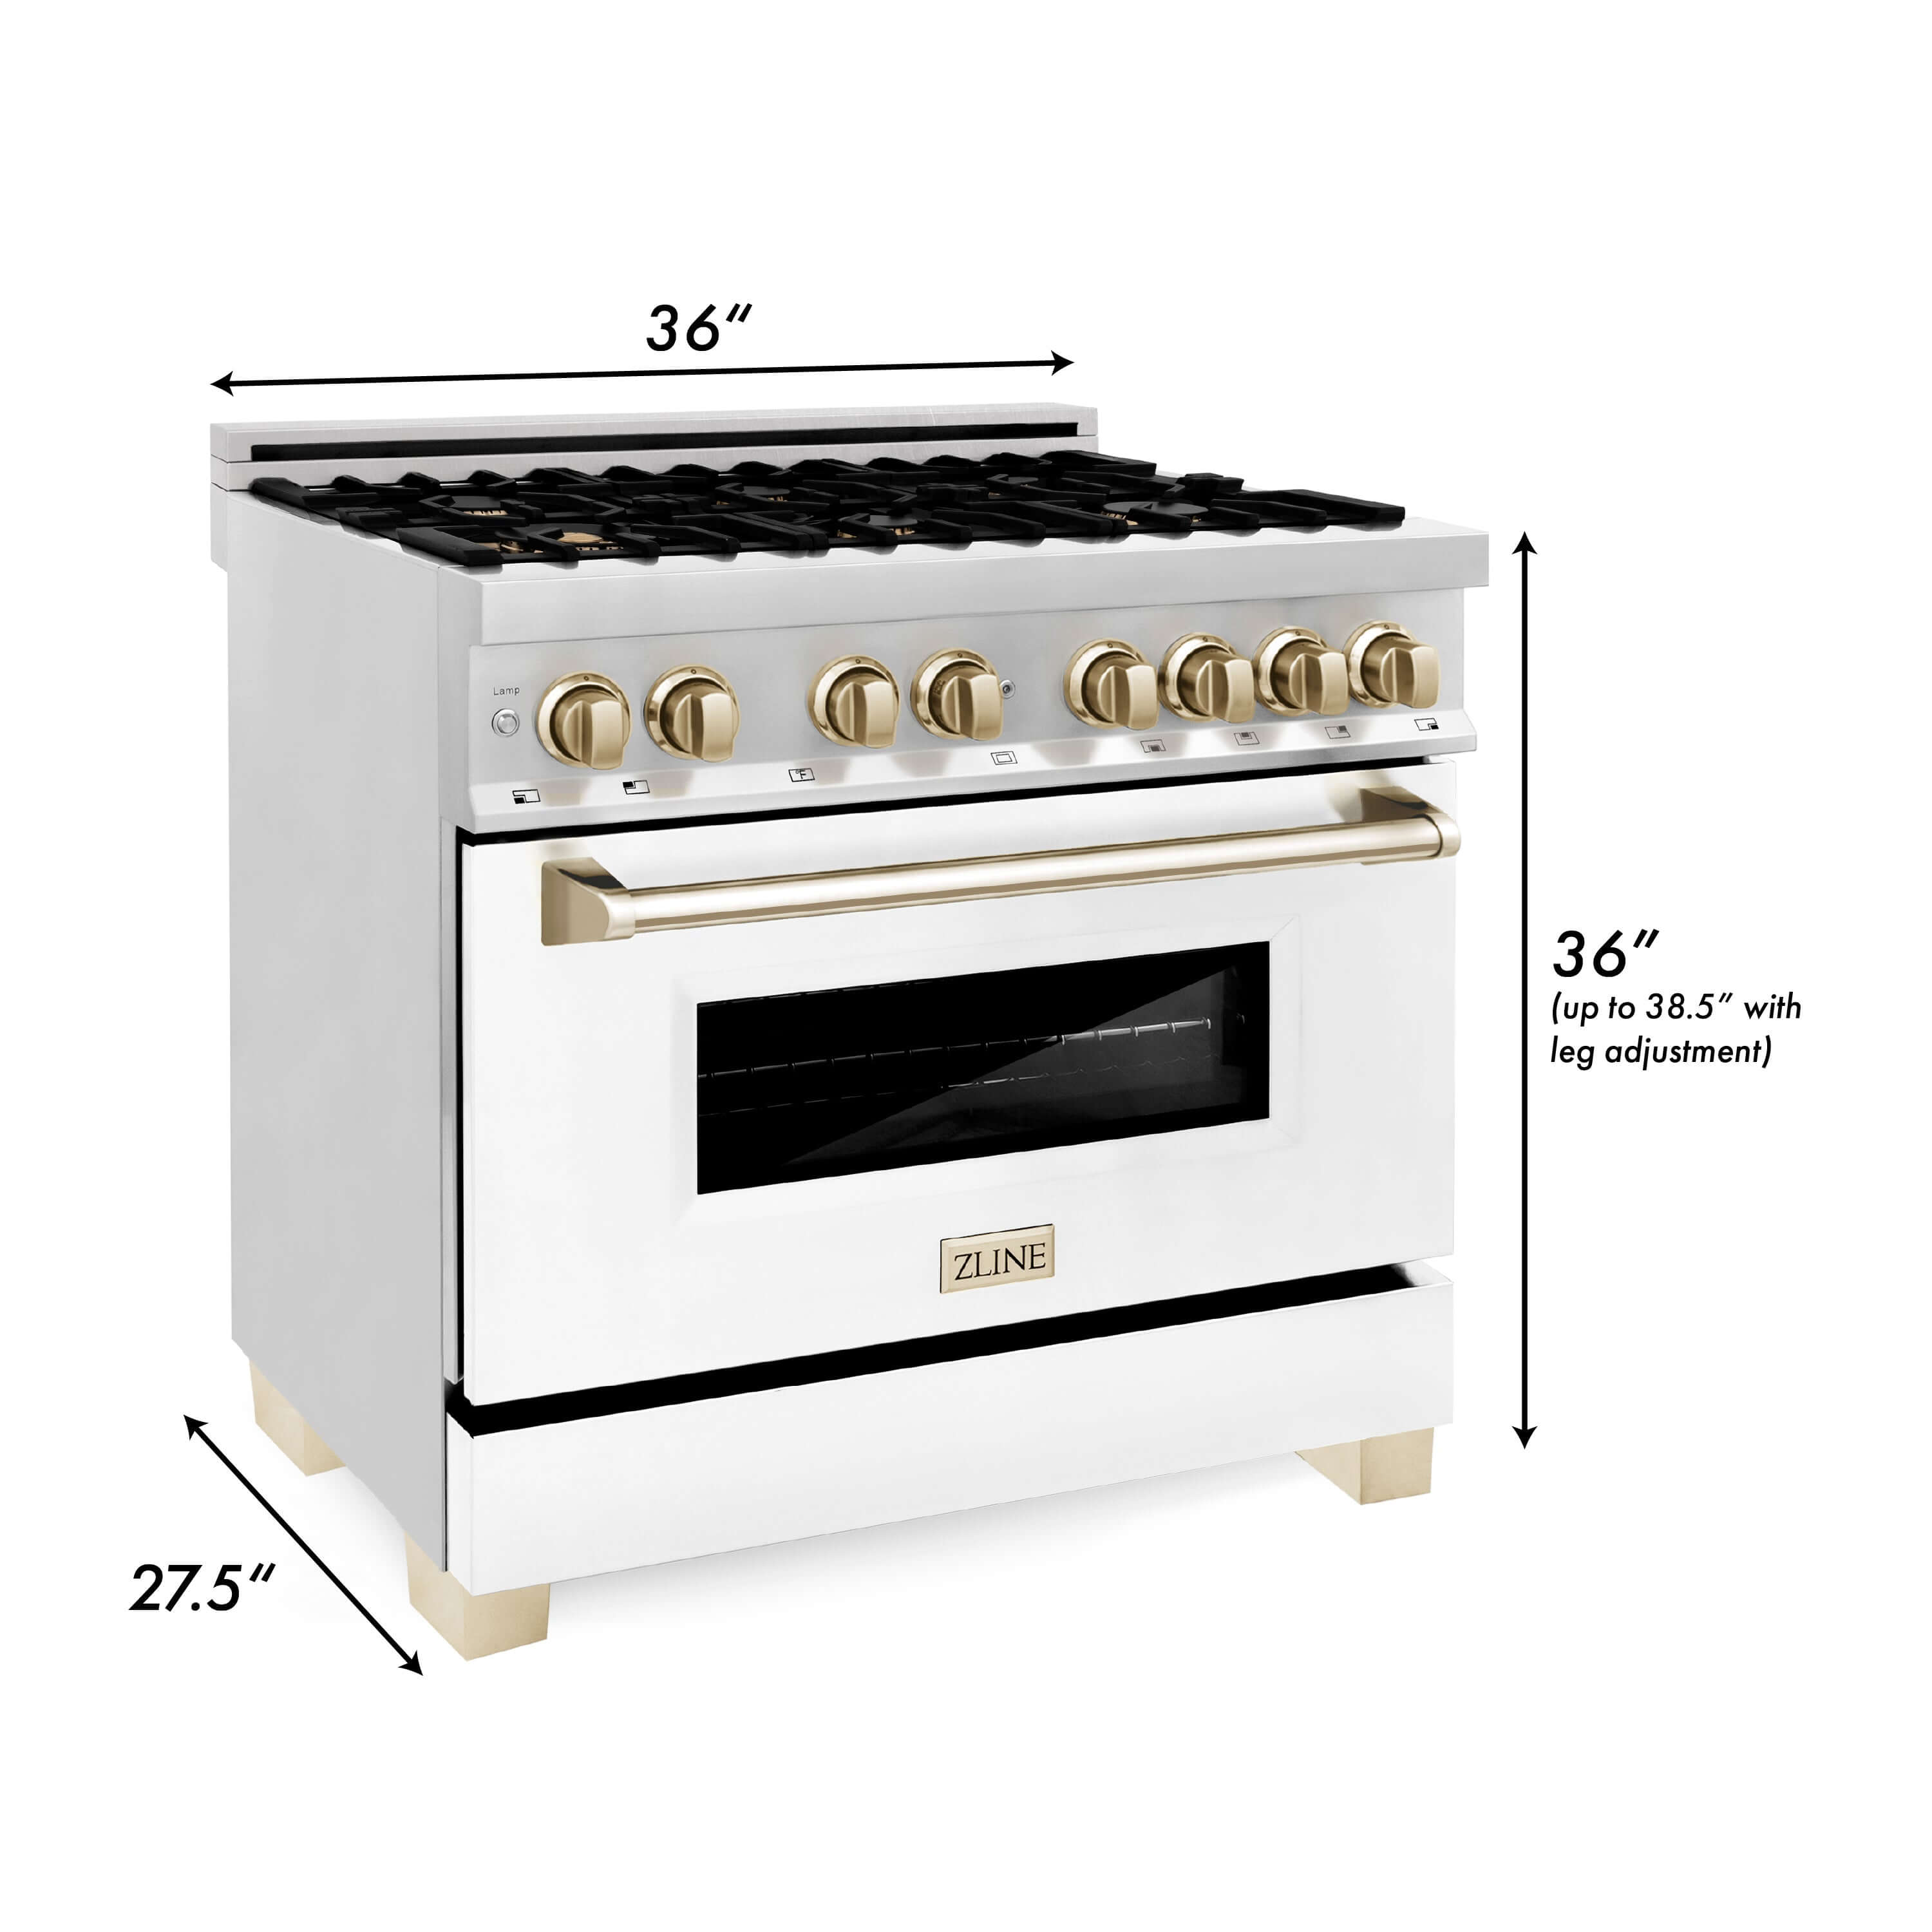 ZLINE Autograph Edition 36 in. Kitchen Package with Stainless Steel Dual Fuel Range with White Matte Door, Range Hood and Dishwasher with Polished Gold Accents (3AKP-RAWMRHDWM36-G) dimensional diagram with measurements.